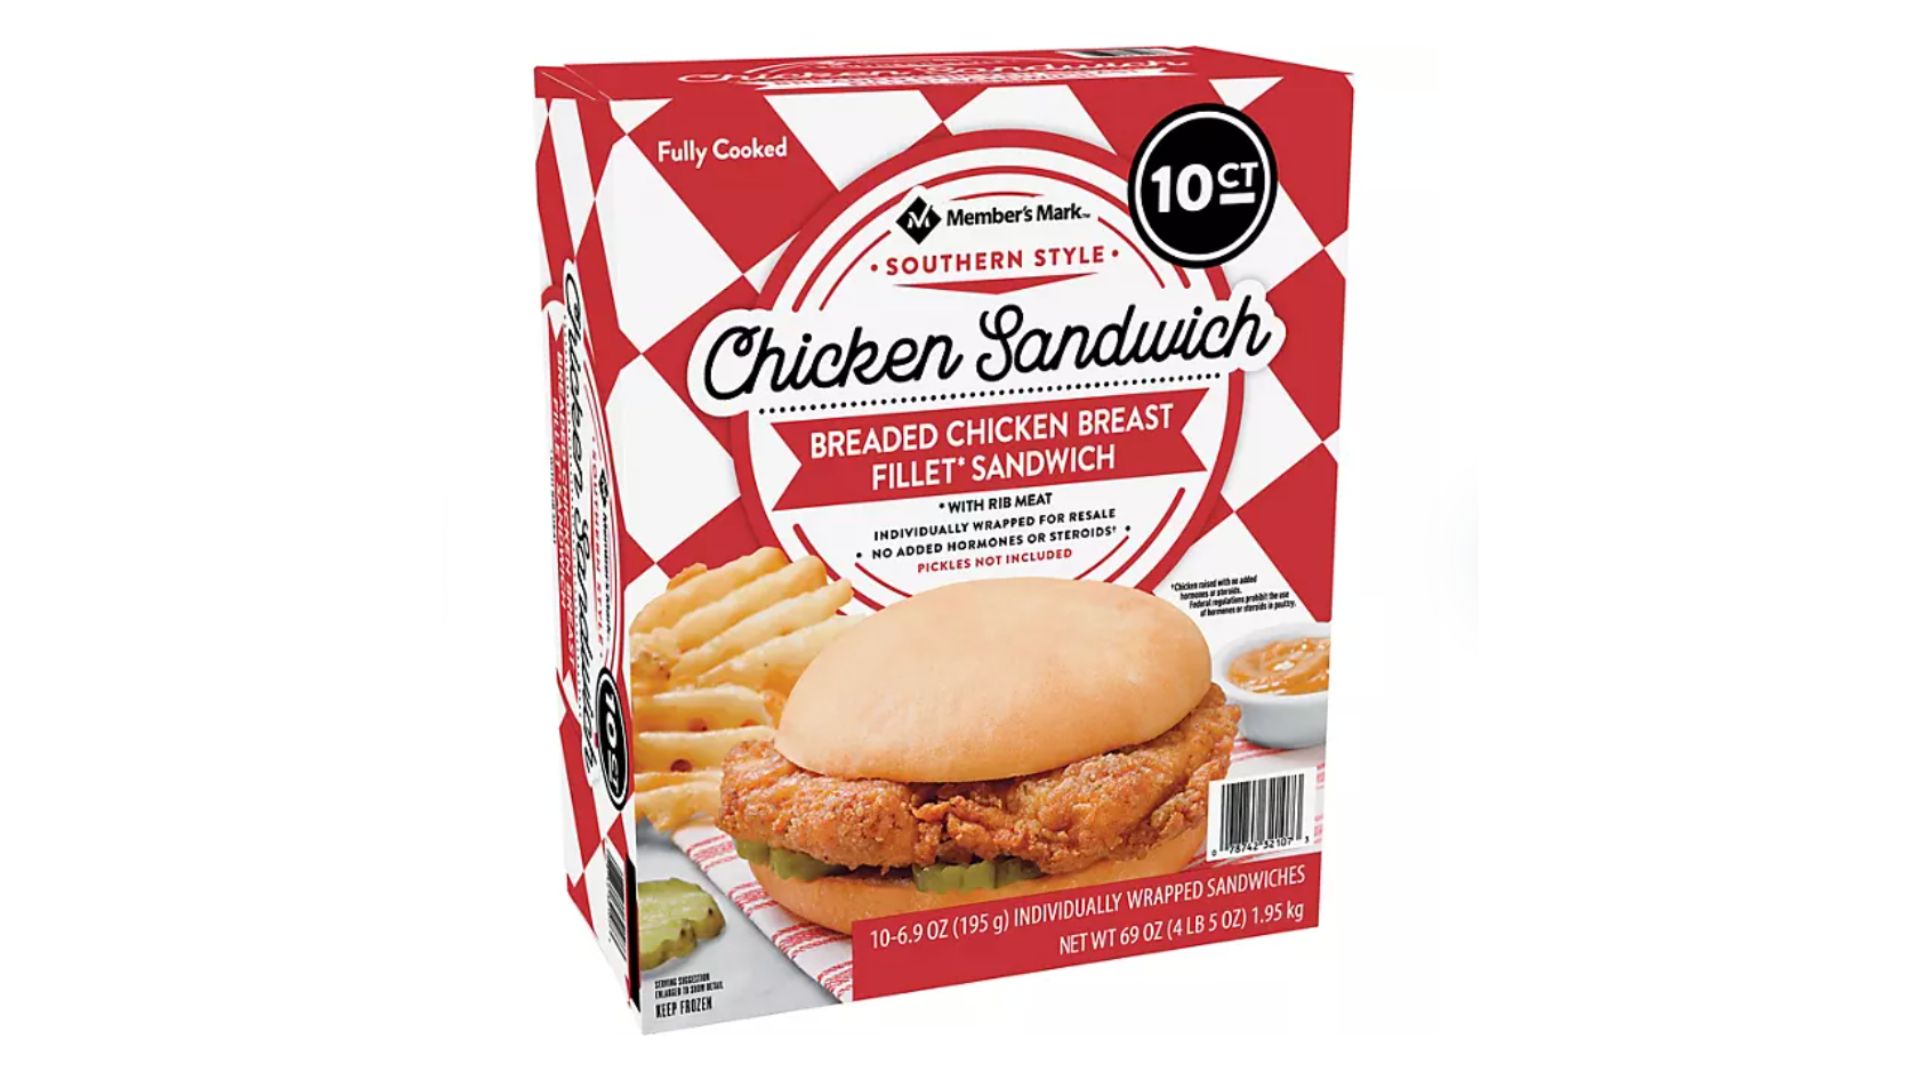 <ul> <li><strong>Price:</strong> <a href="https://www.samsclub.com/p/members-mark-southern-style-chicken-sandwich-frozen-10ct/prod23133489" rel="noreferrer noopener">$19.98</a></li> </ul> <p>There are 310 one-star reviews for the Member's Mark Southern-style chicken sandwich on the Sam's Club website. Common complaints from reviewers included disliking the taste of the chicken and the bread for the sandwich being too dry and small.</p> <p>"It tasted ok in the club as a sample but it's gross," wrote reviewer Kay.</p>